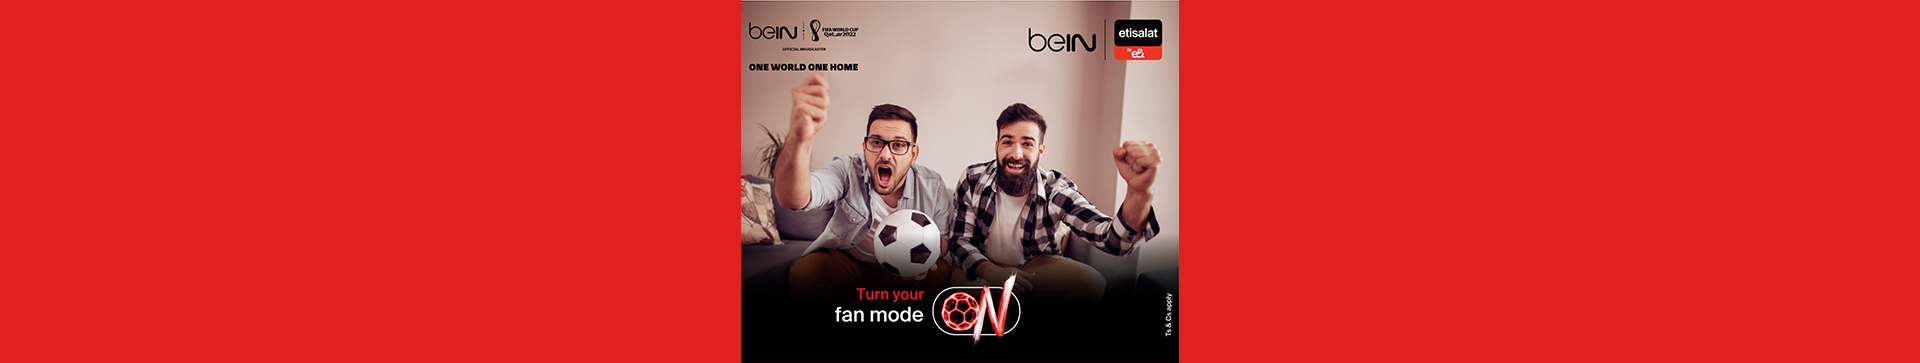 bein-fifa-bundle-packages-1920x363